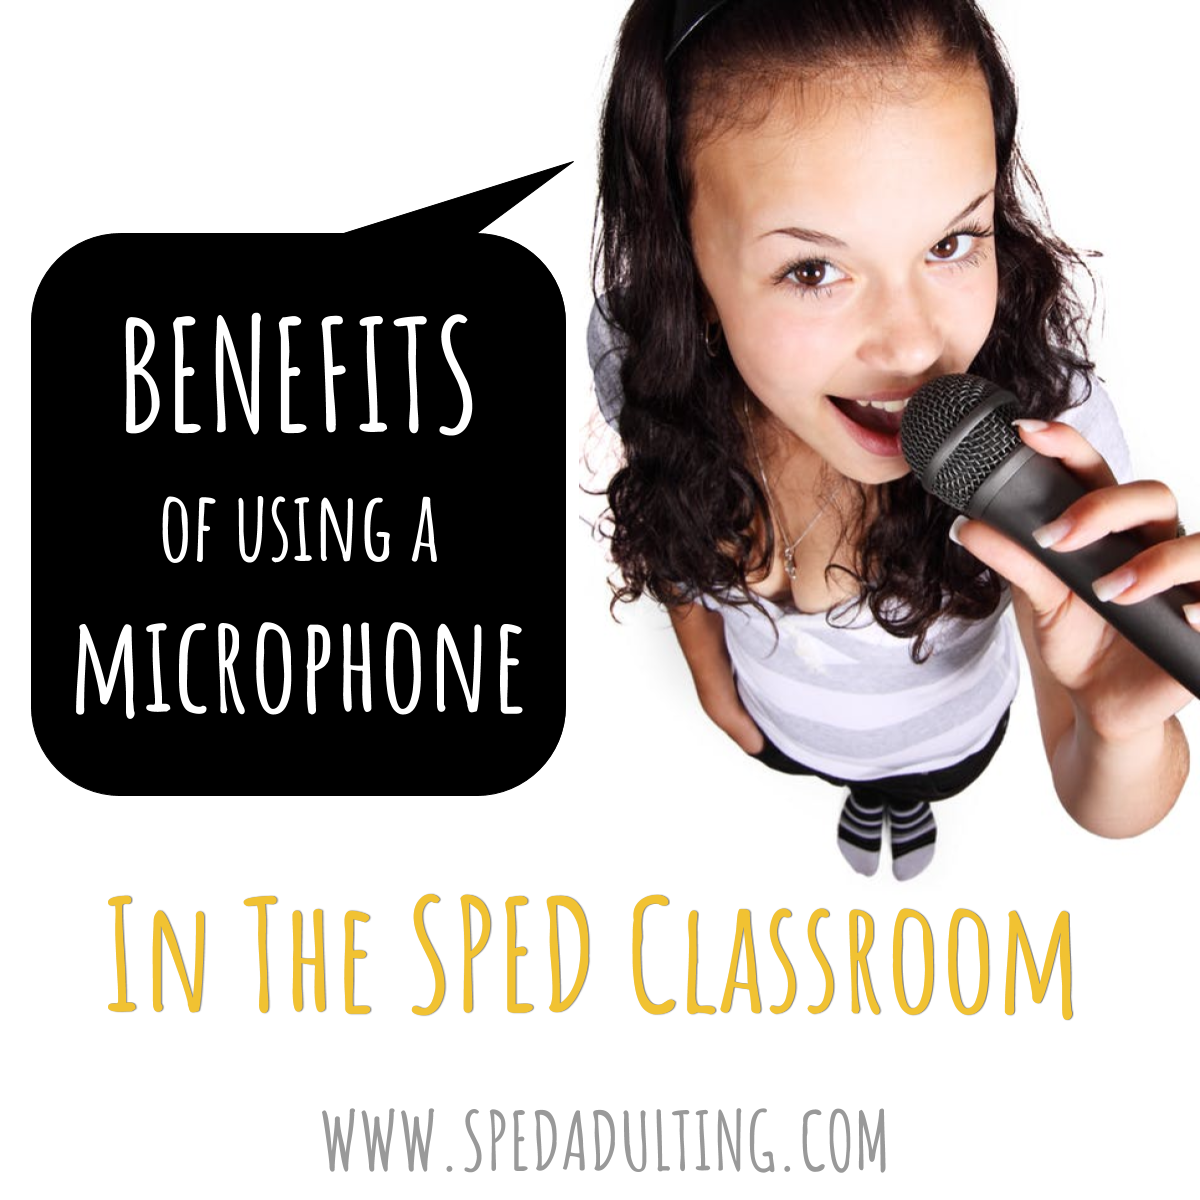 BLOG: Benefits of using a microphone in the special education classroom